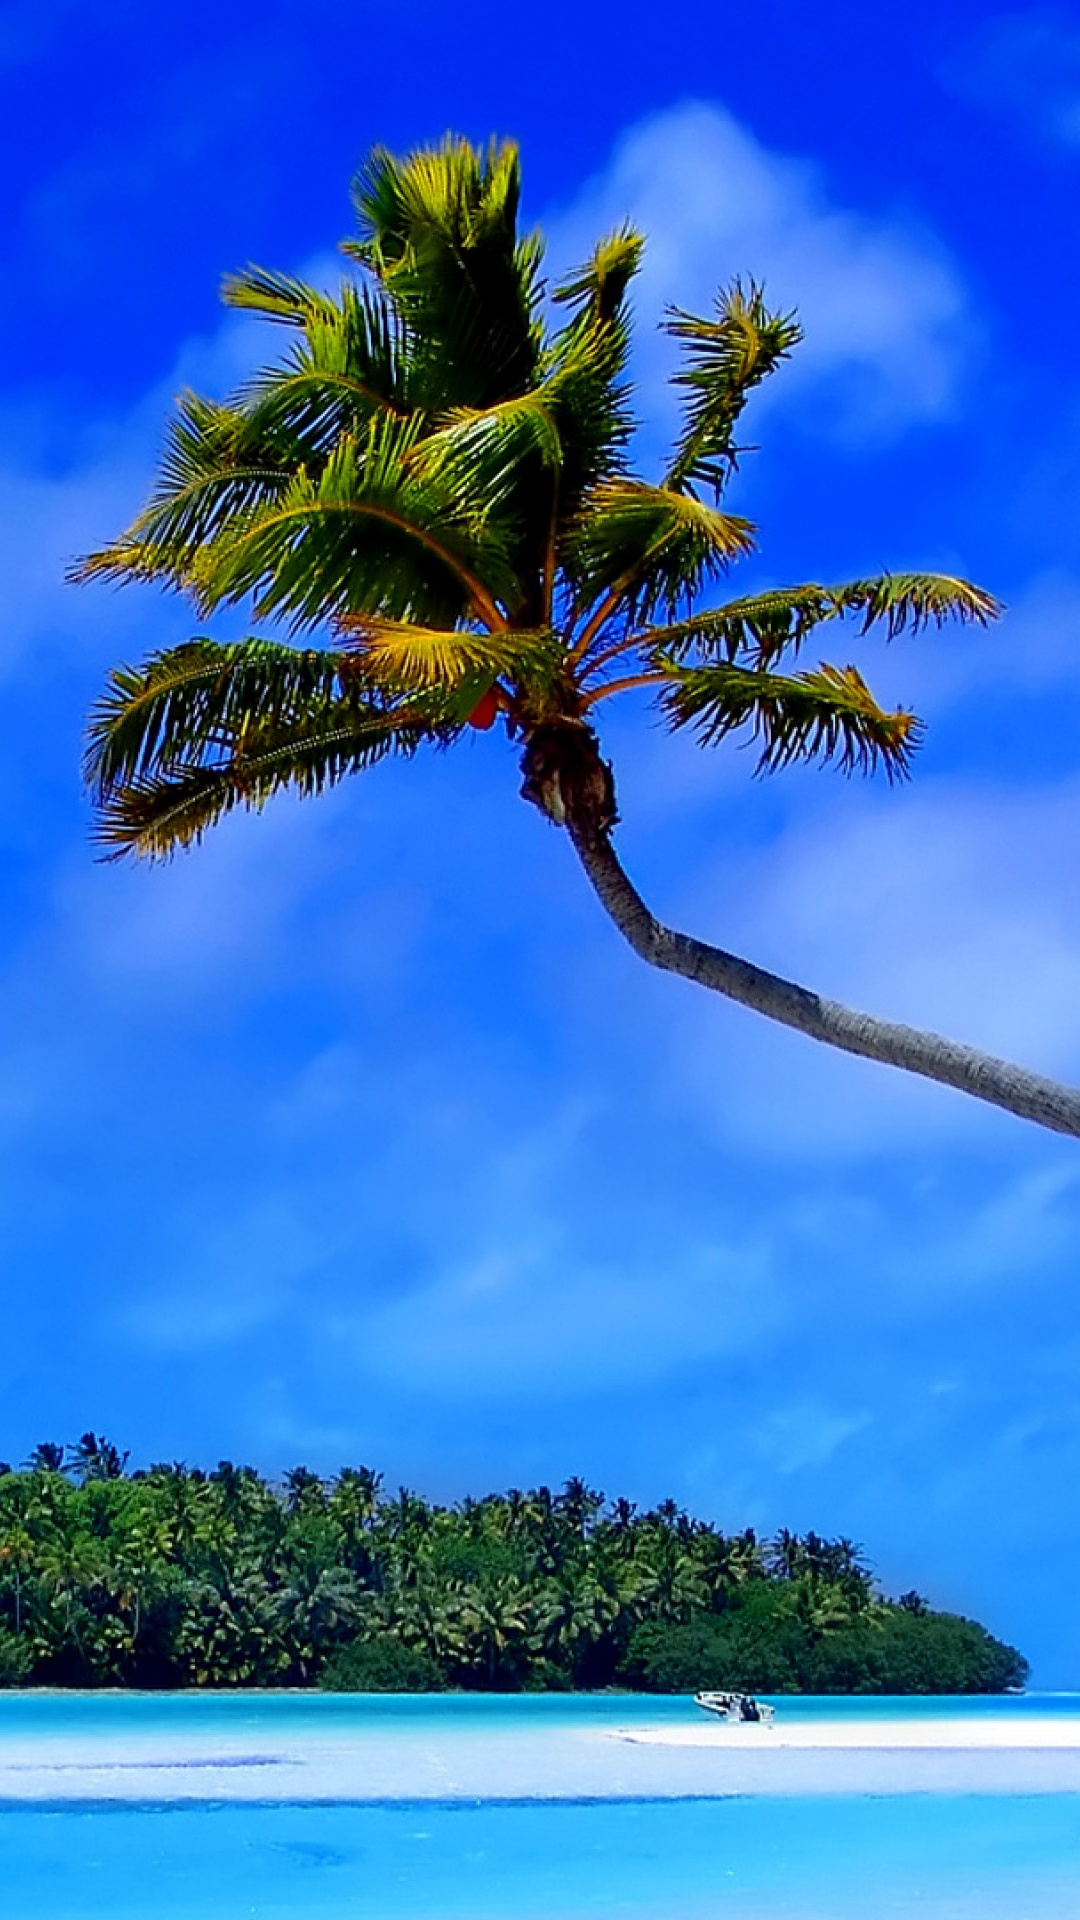 Caribbean Islands: Home to the El Yunque National Forest in Puerto Rico and the Bob Marley Museum in Jamaica. 1080x1920 Full HD Background.